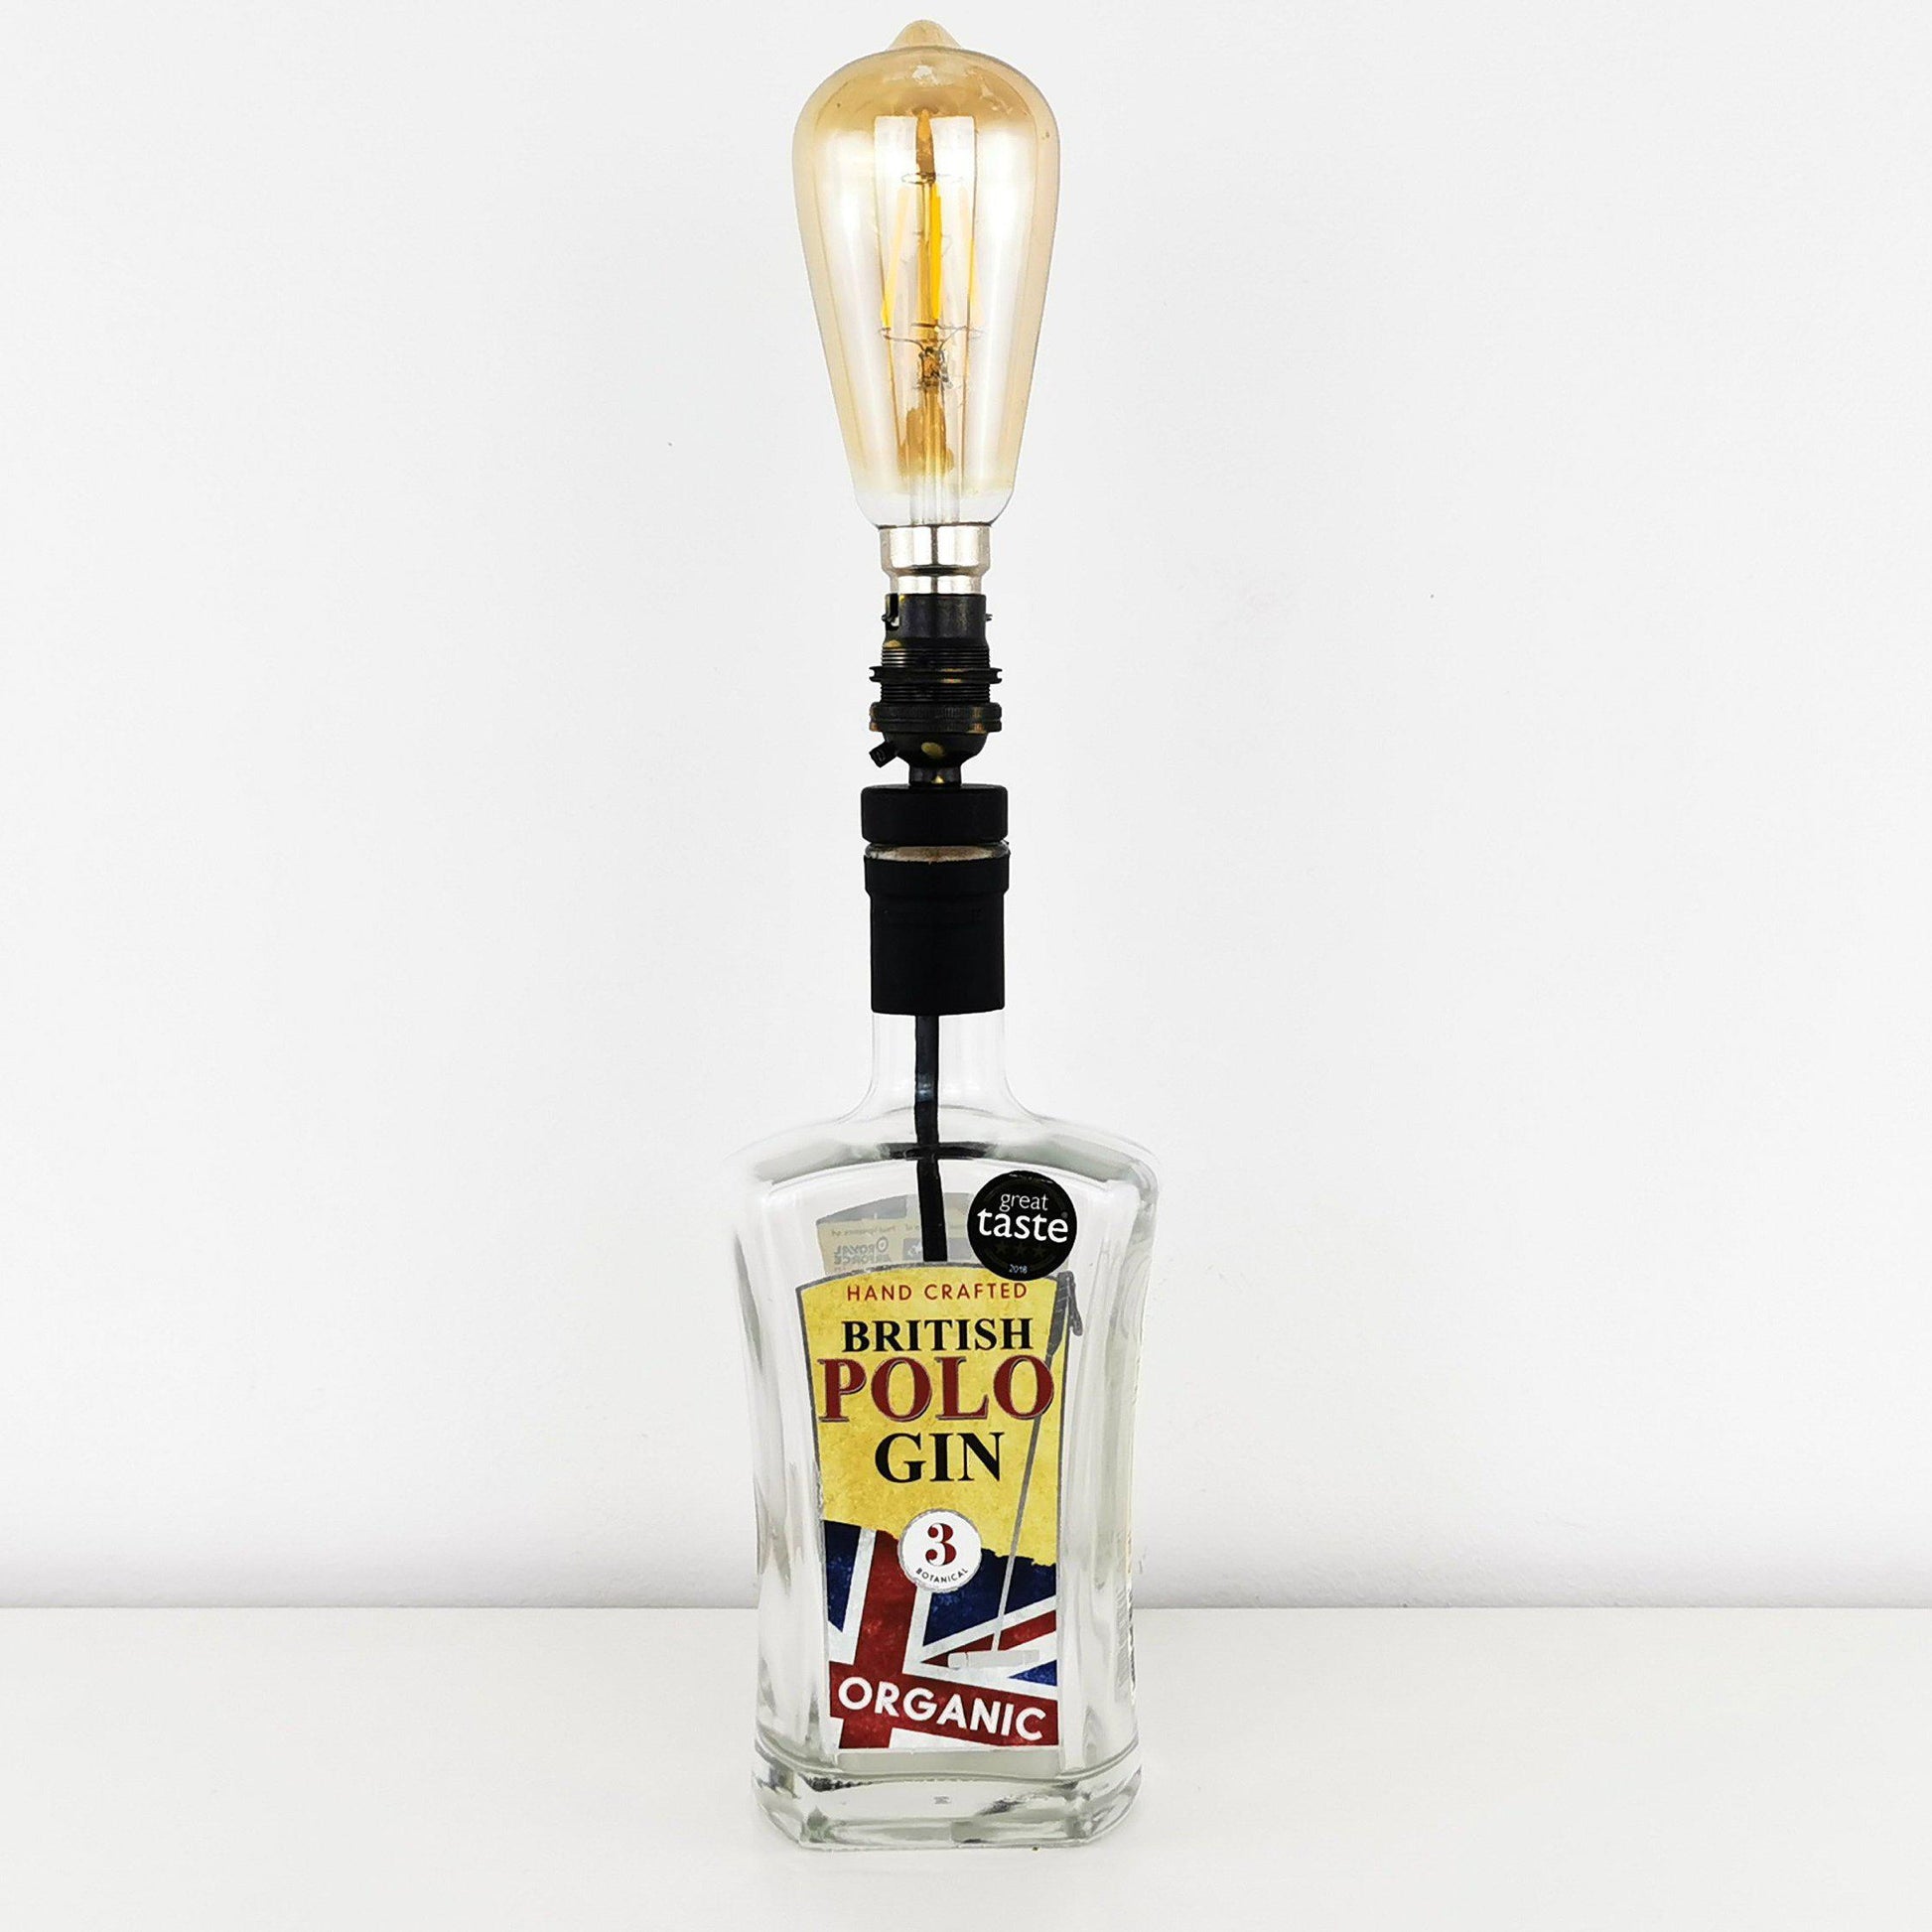 British Polo Gin Bottle Table Lamp Gin Bottle Table Lamps